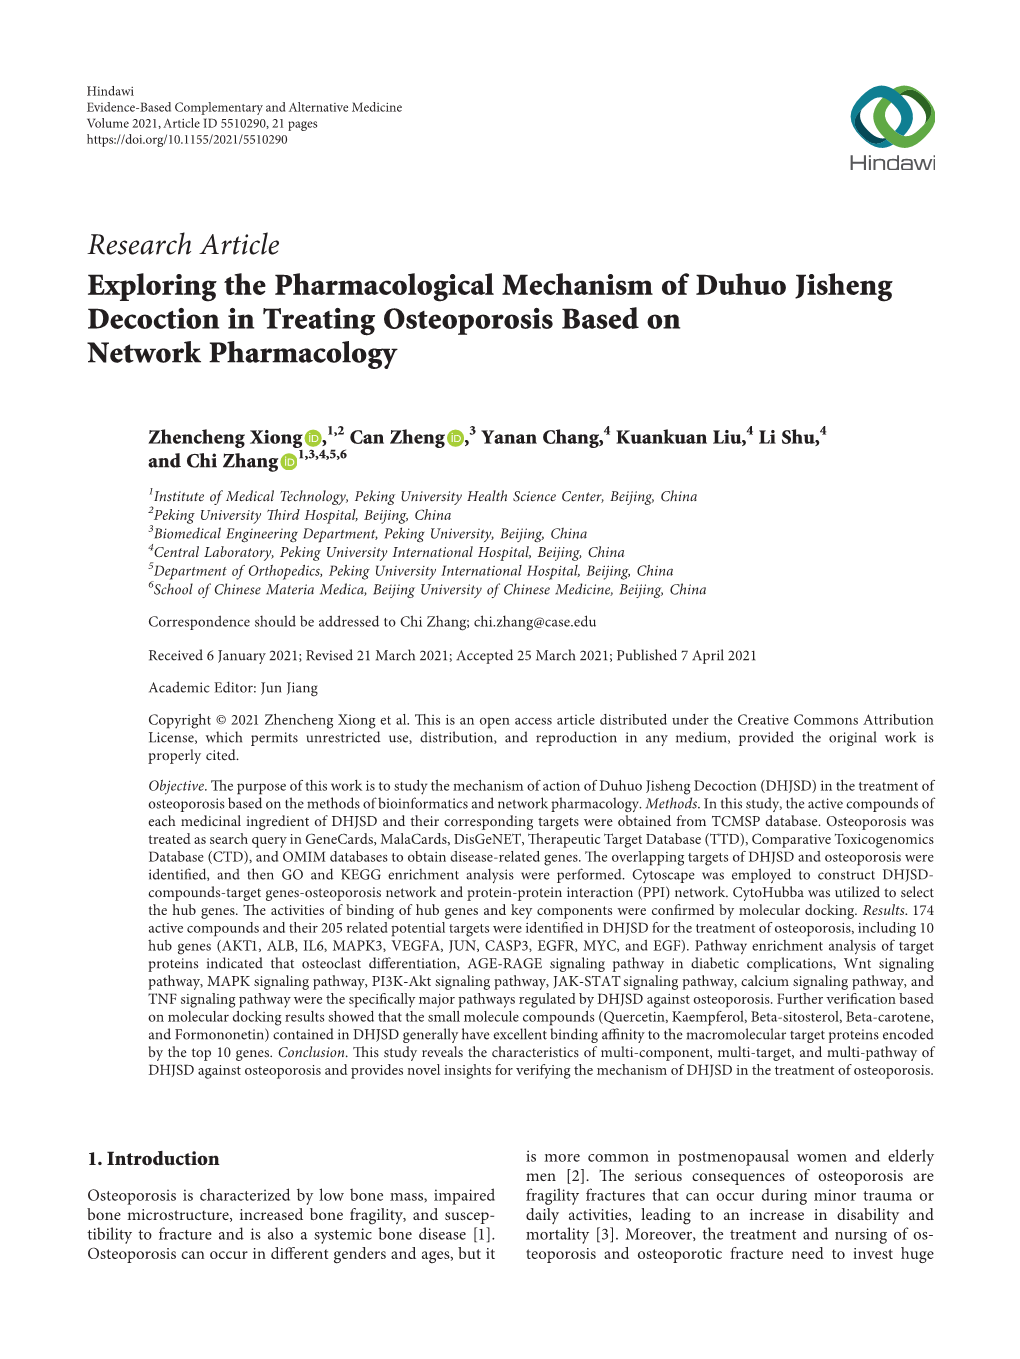 Exploring the Pharmacological Mechanism of Duhuo Jisheng Decoction in Treating Osteoporosis Based on Network Pharmacology